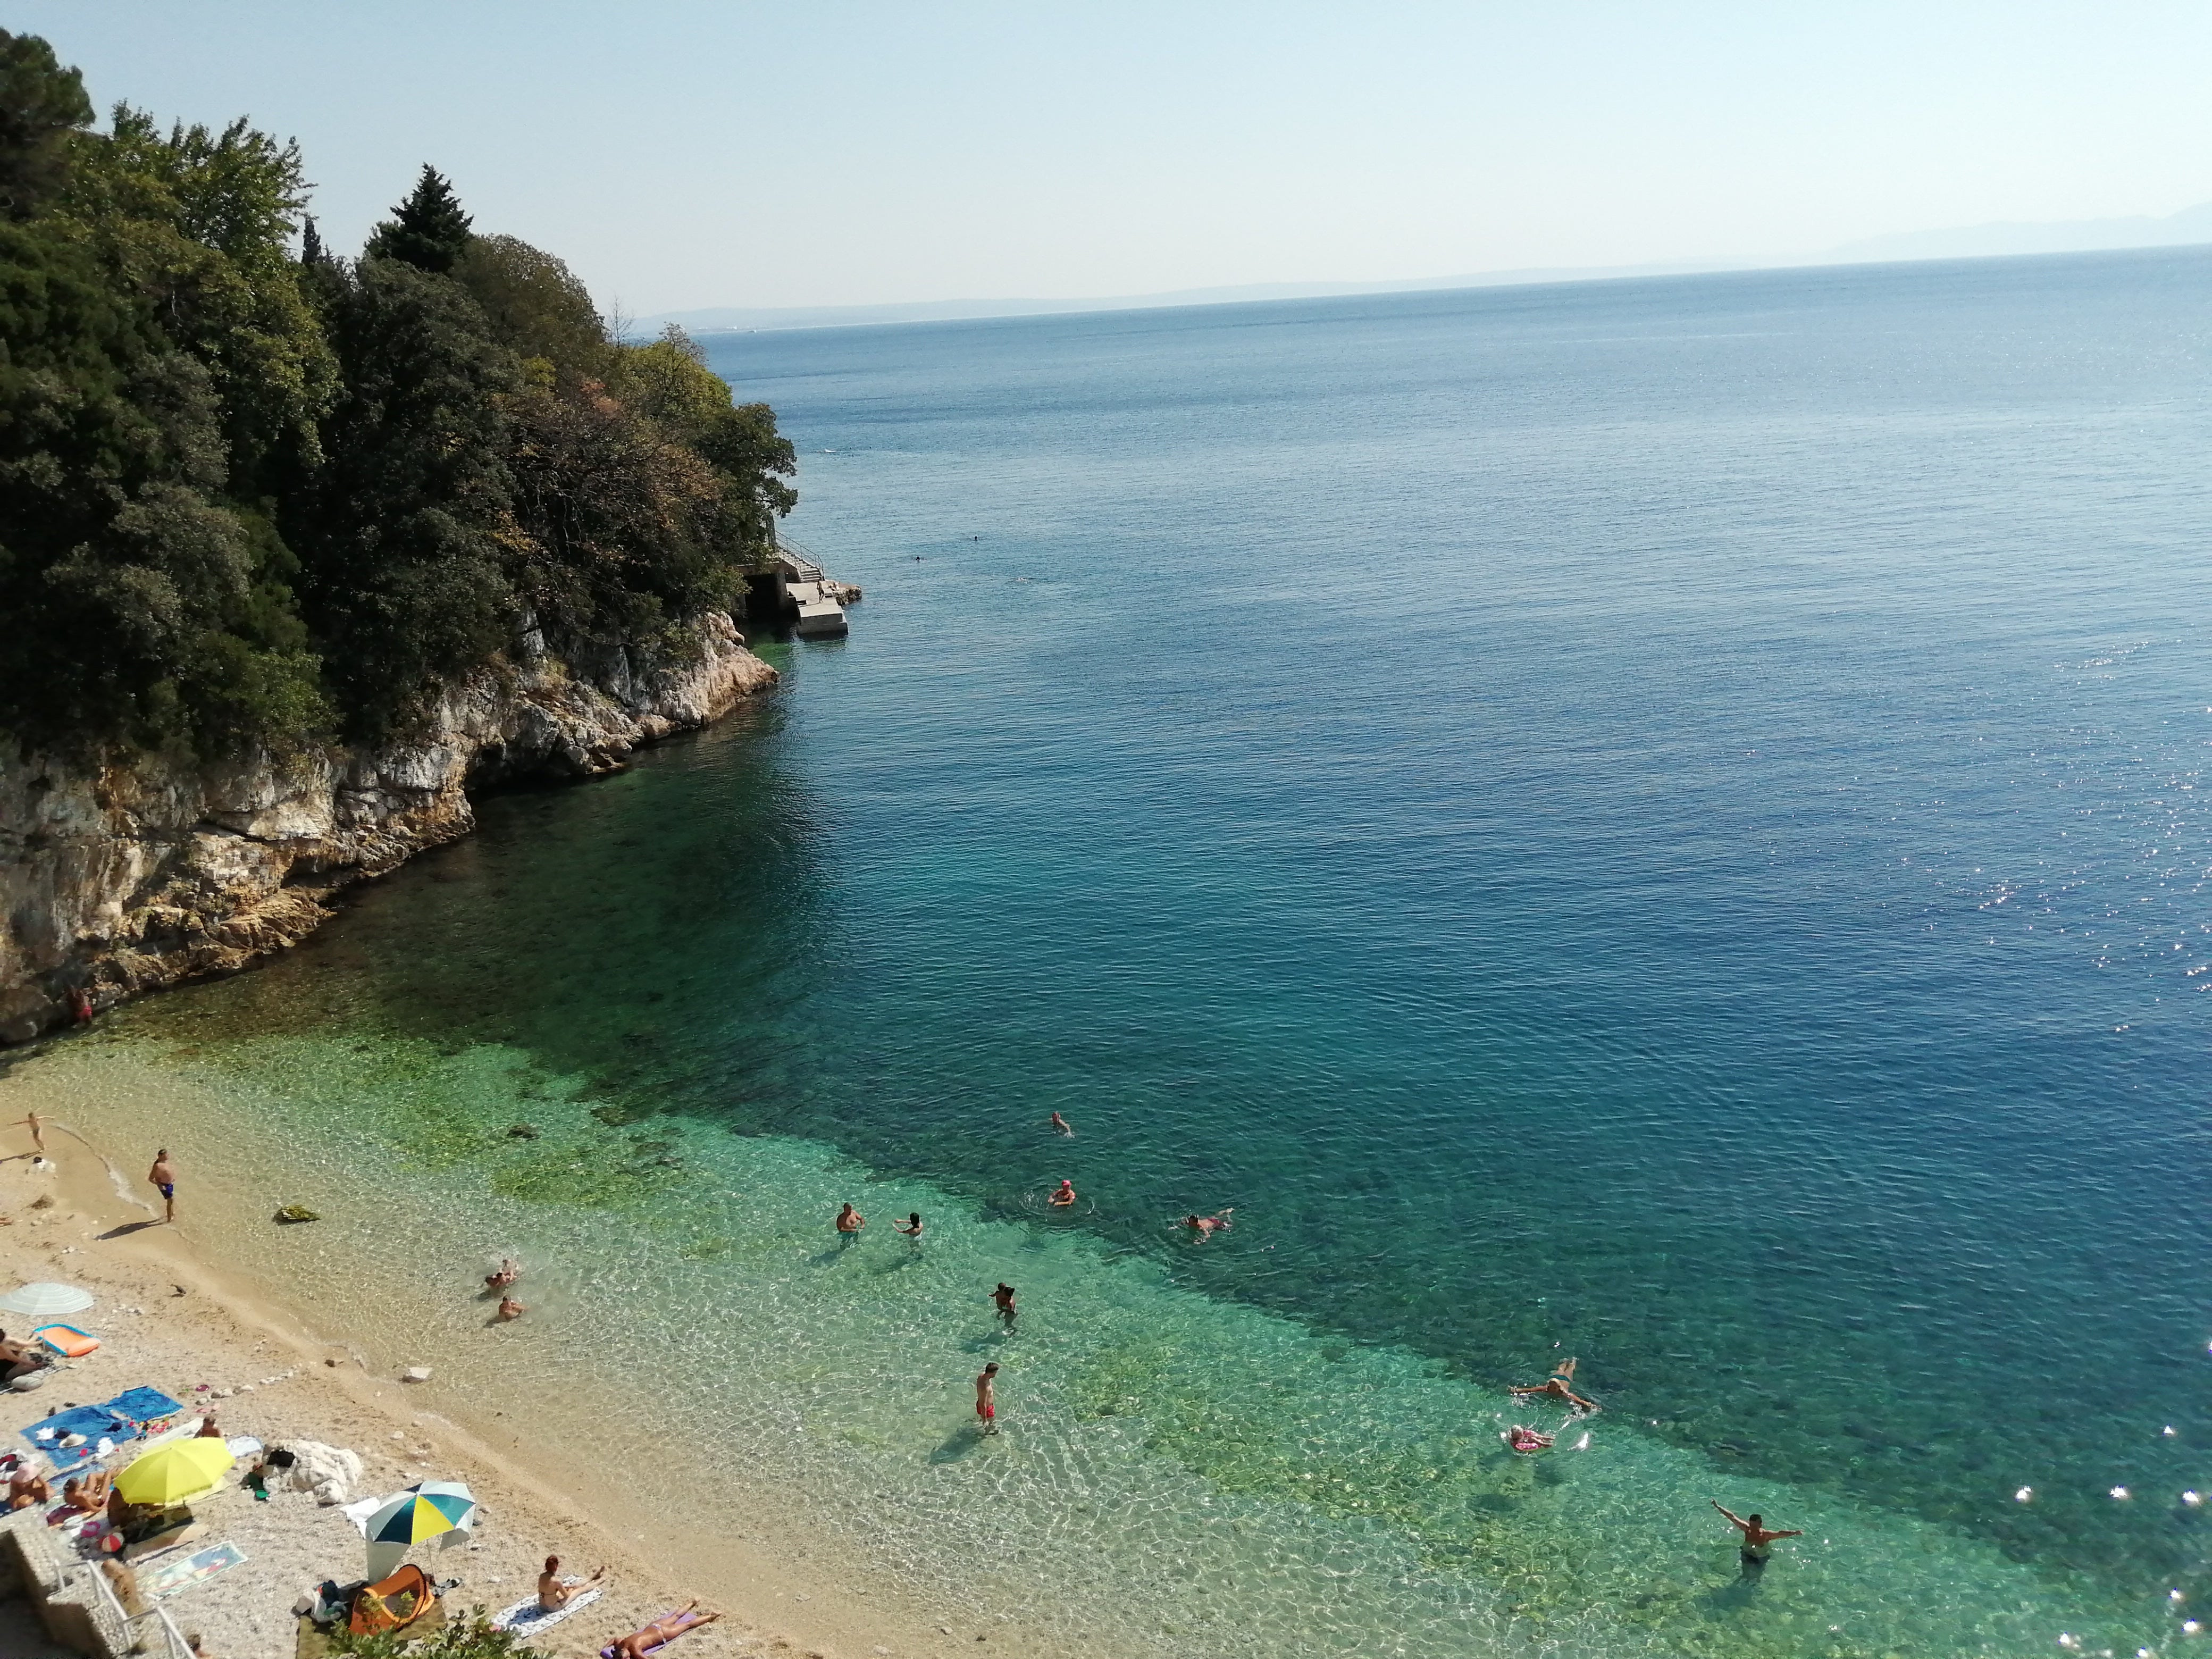 Nearby beaches offer the chance to take a dip in the Adriatic